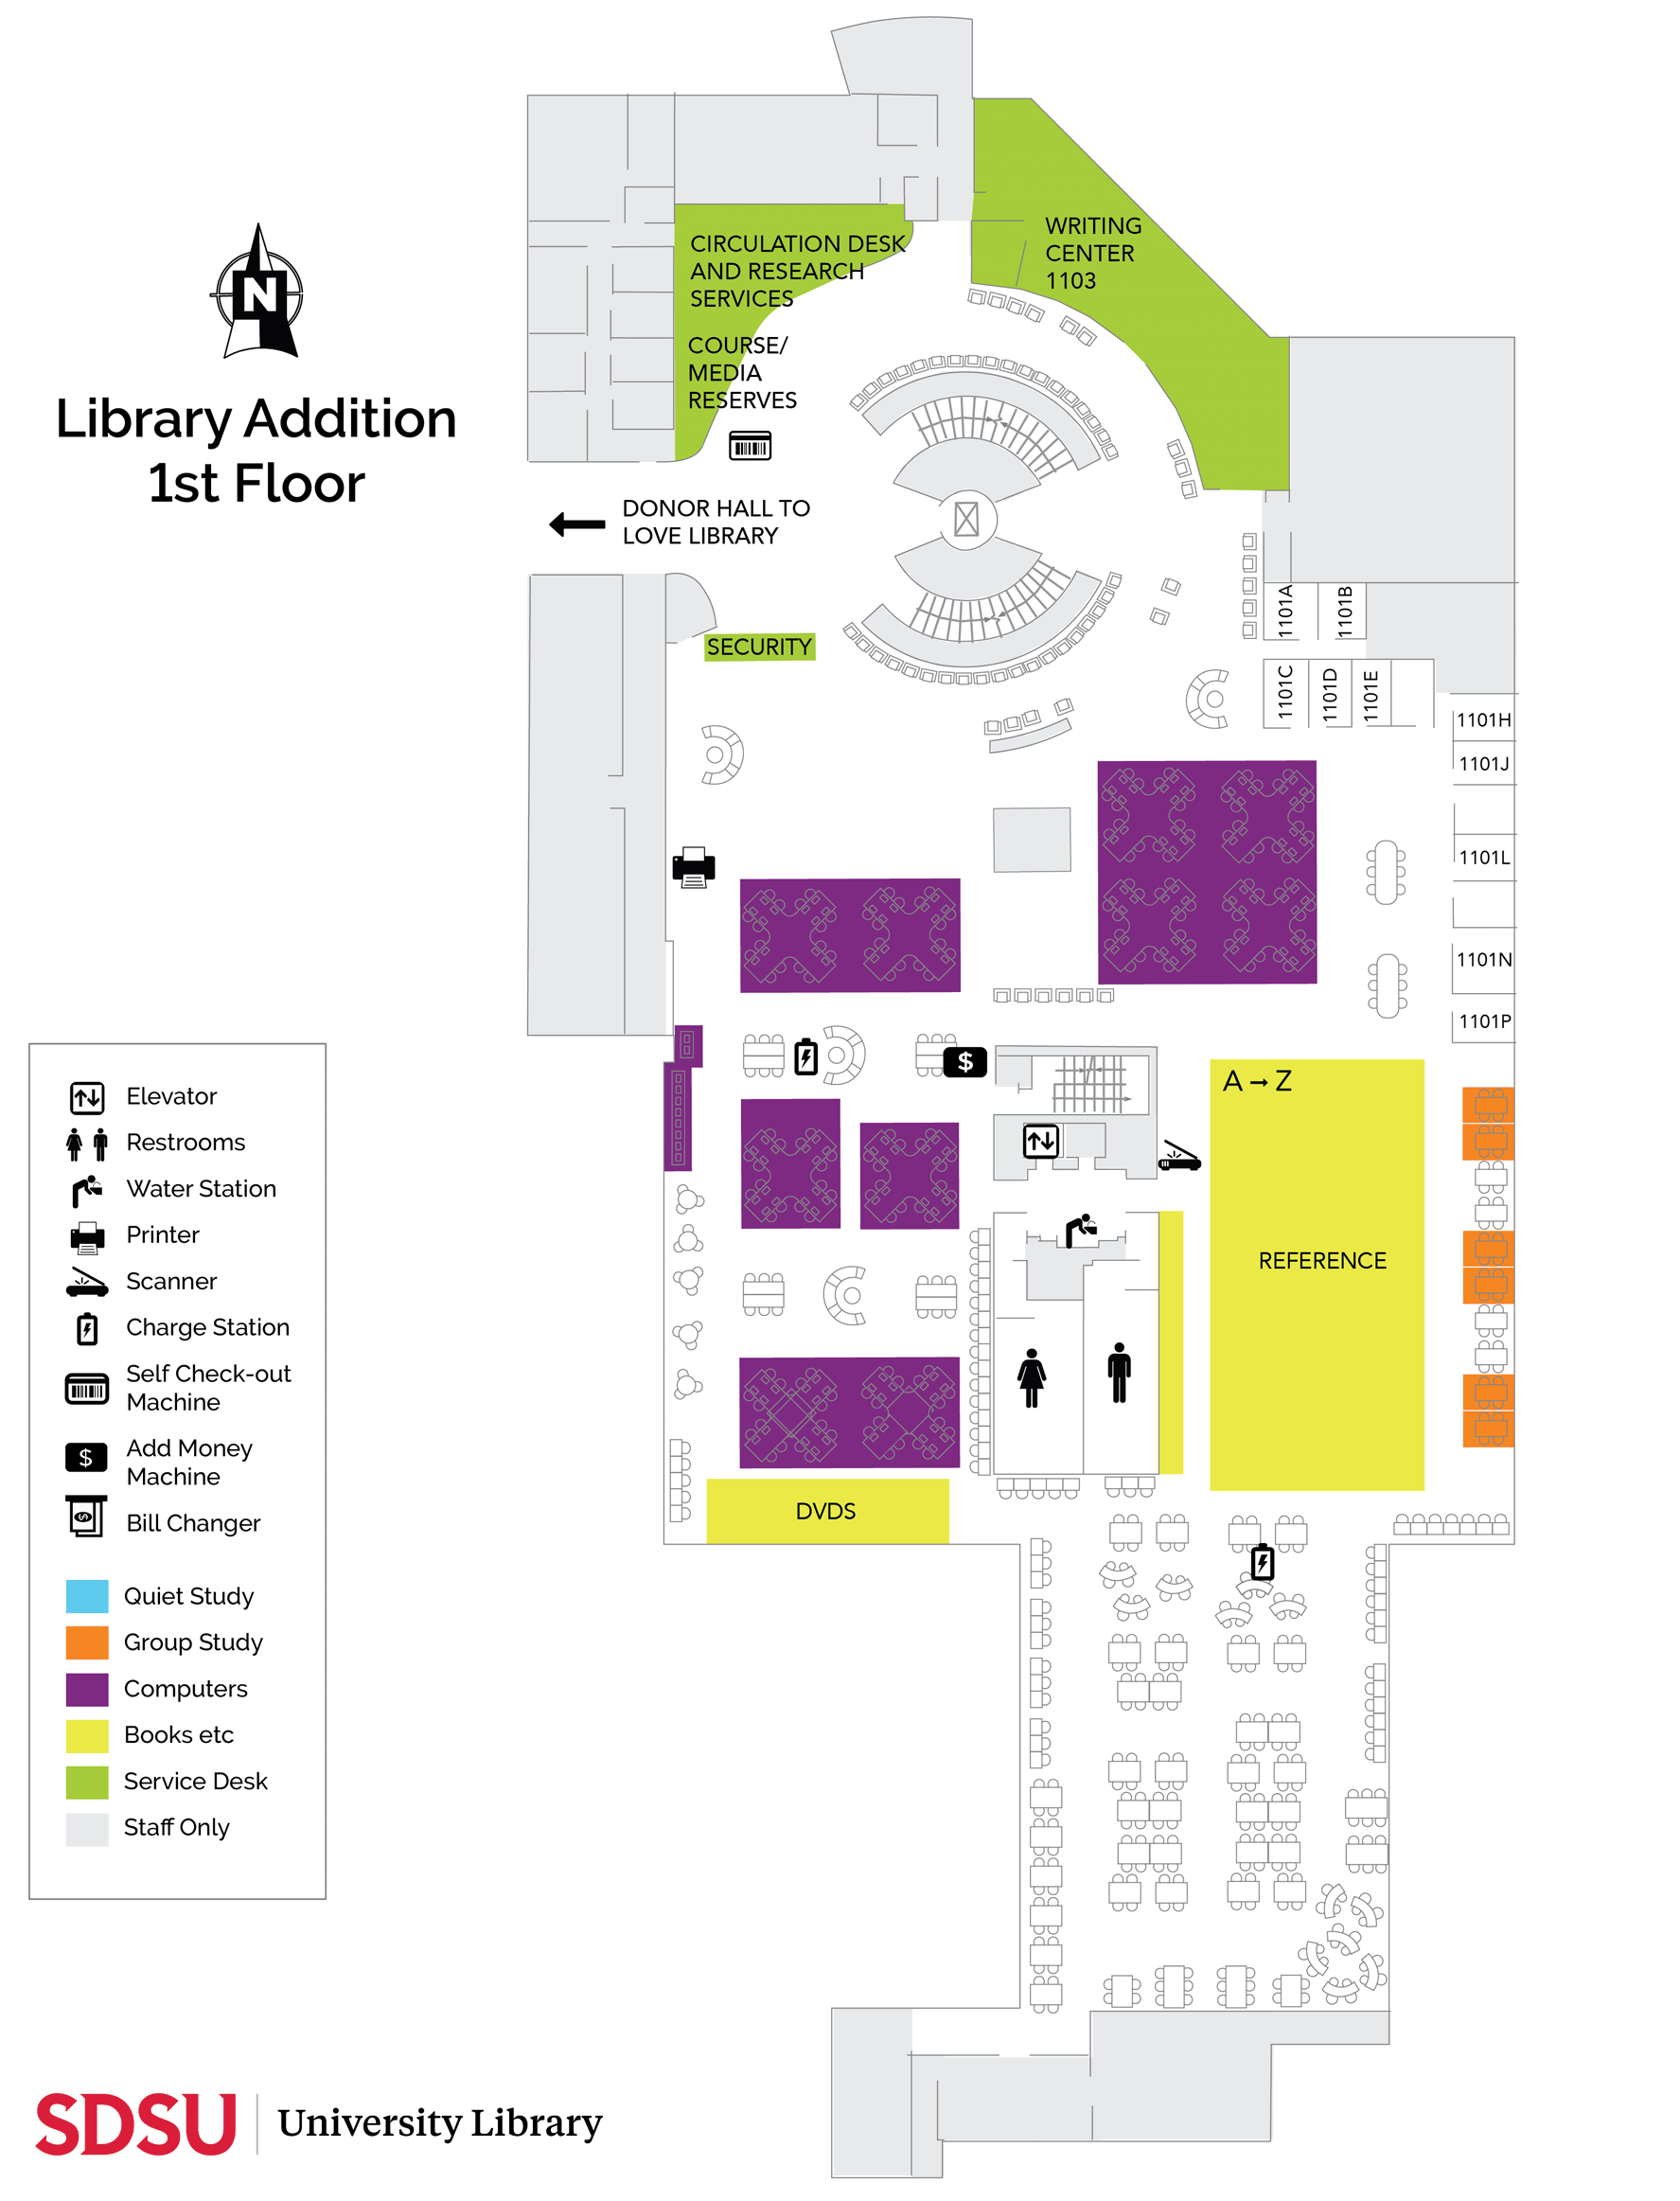 Library Addition 1st Floor Map